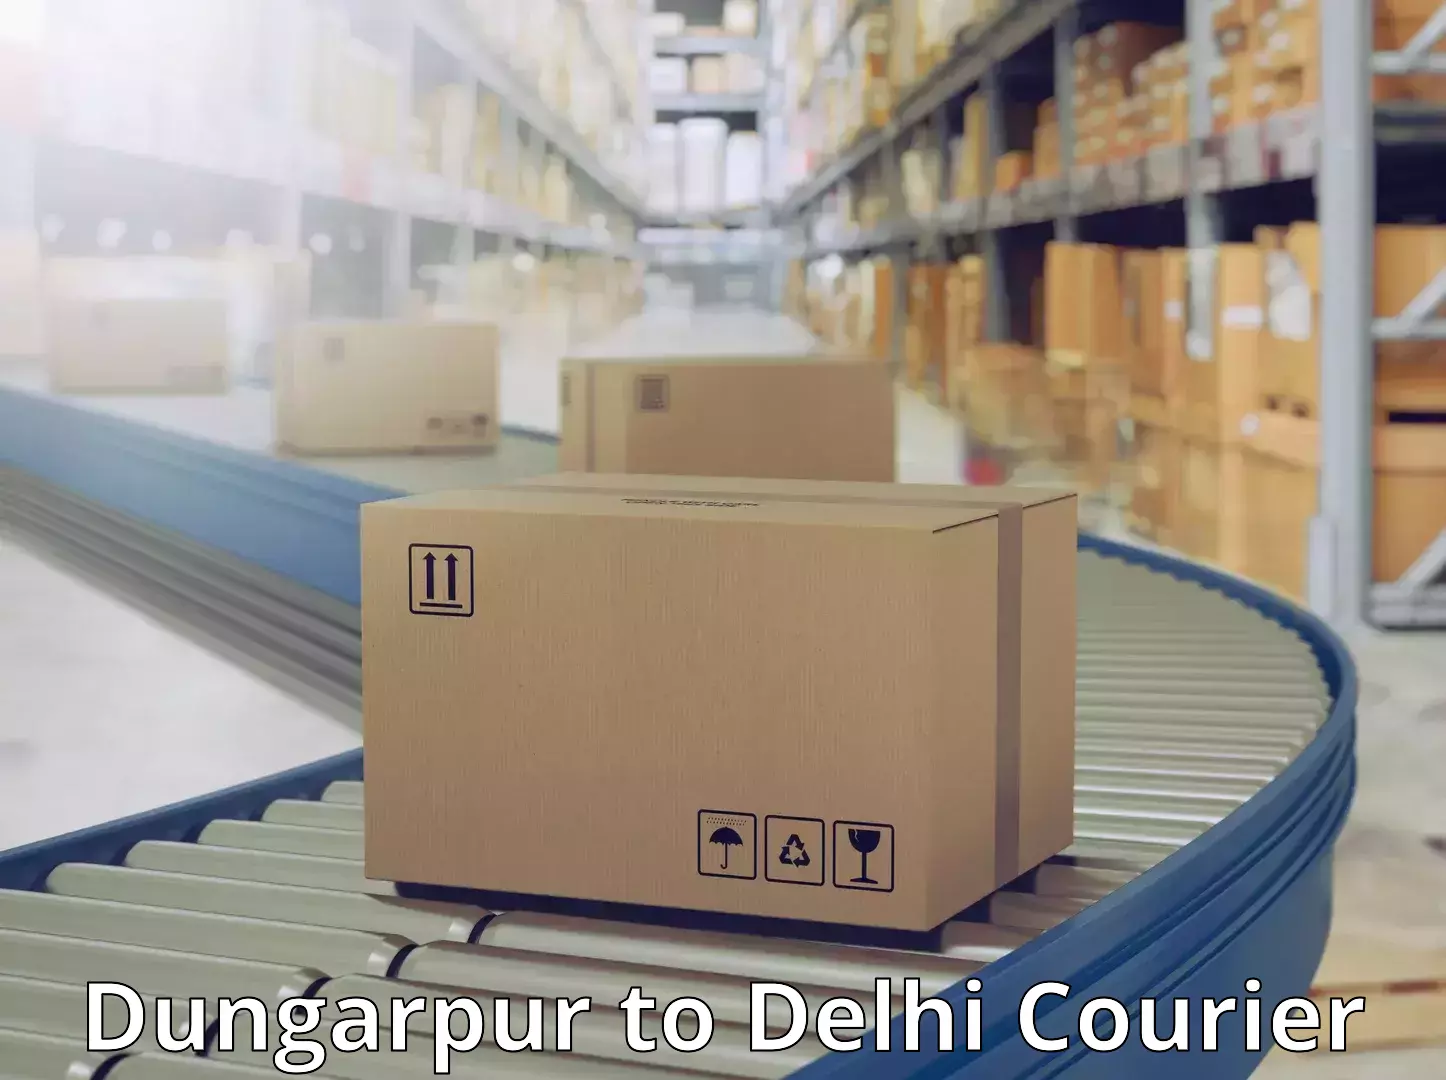 24-hour delivery options Dungarpur to University of Delhi